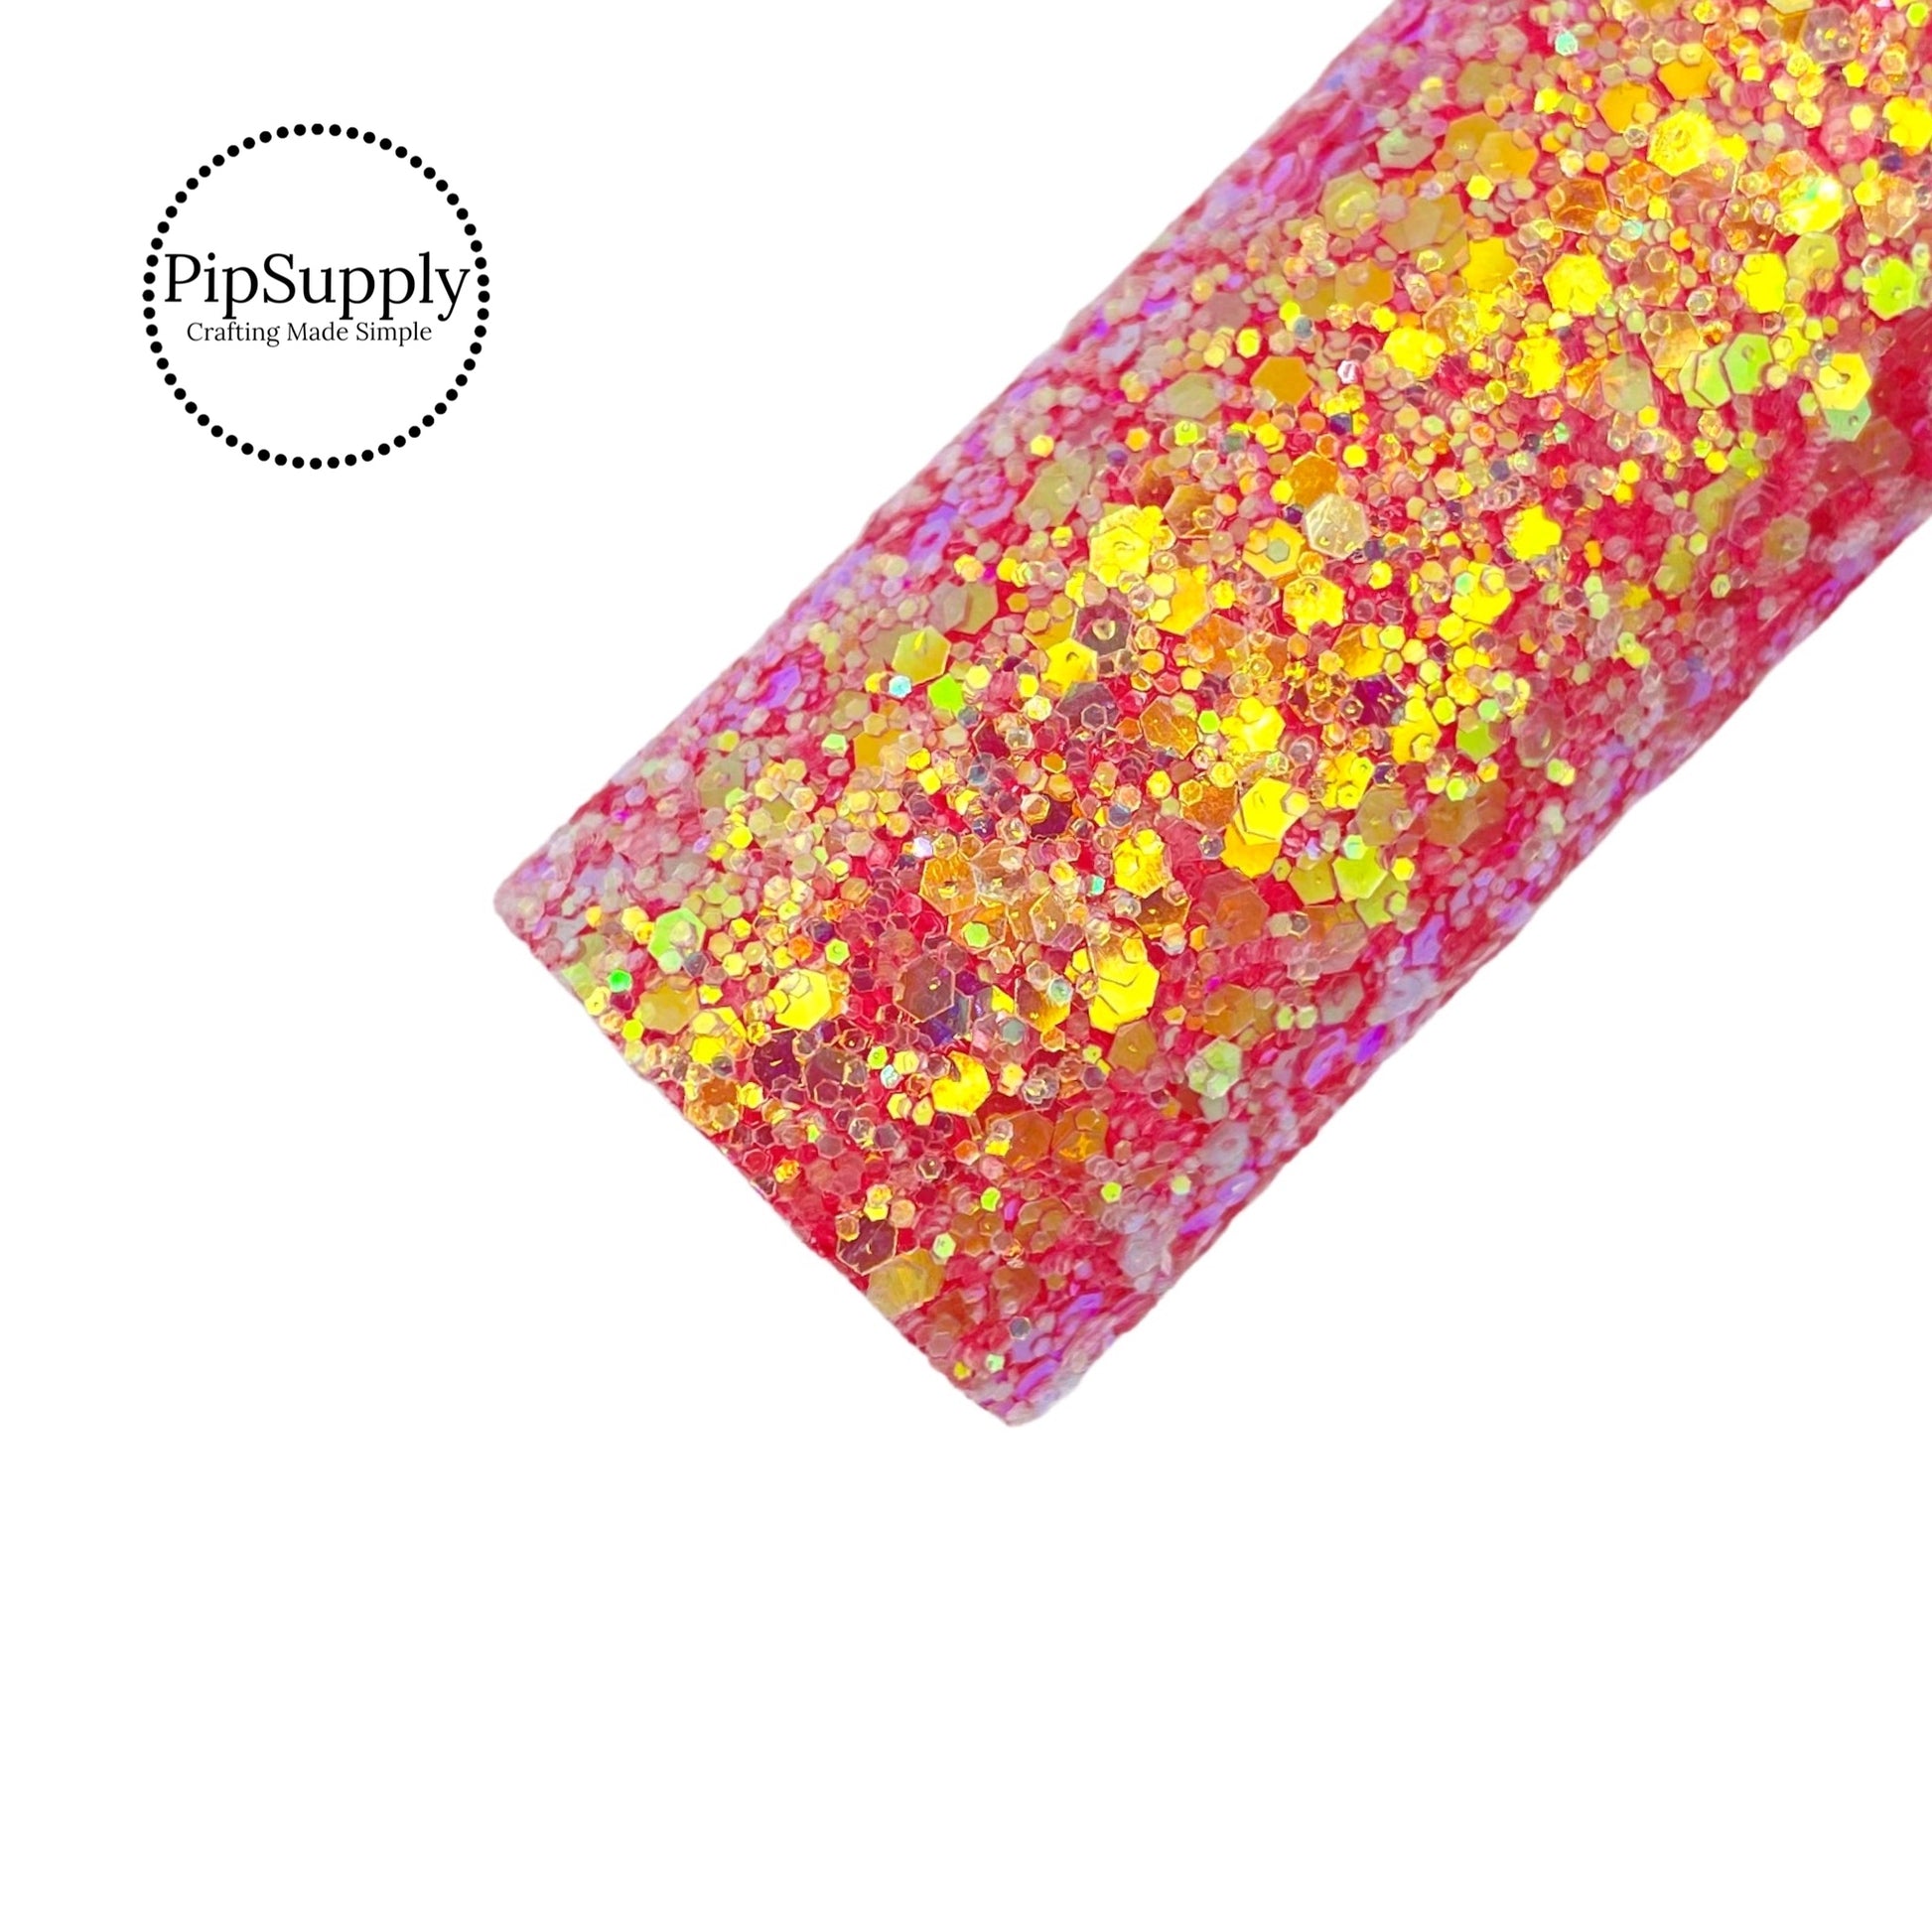 Iridescent Coral Chunky Glitter Sheet - Solid Coral Iridescent